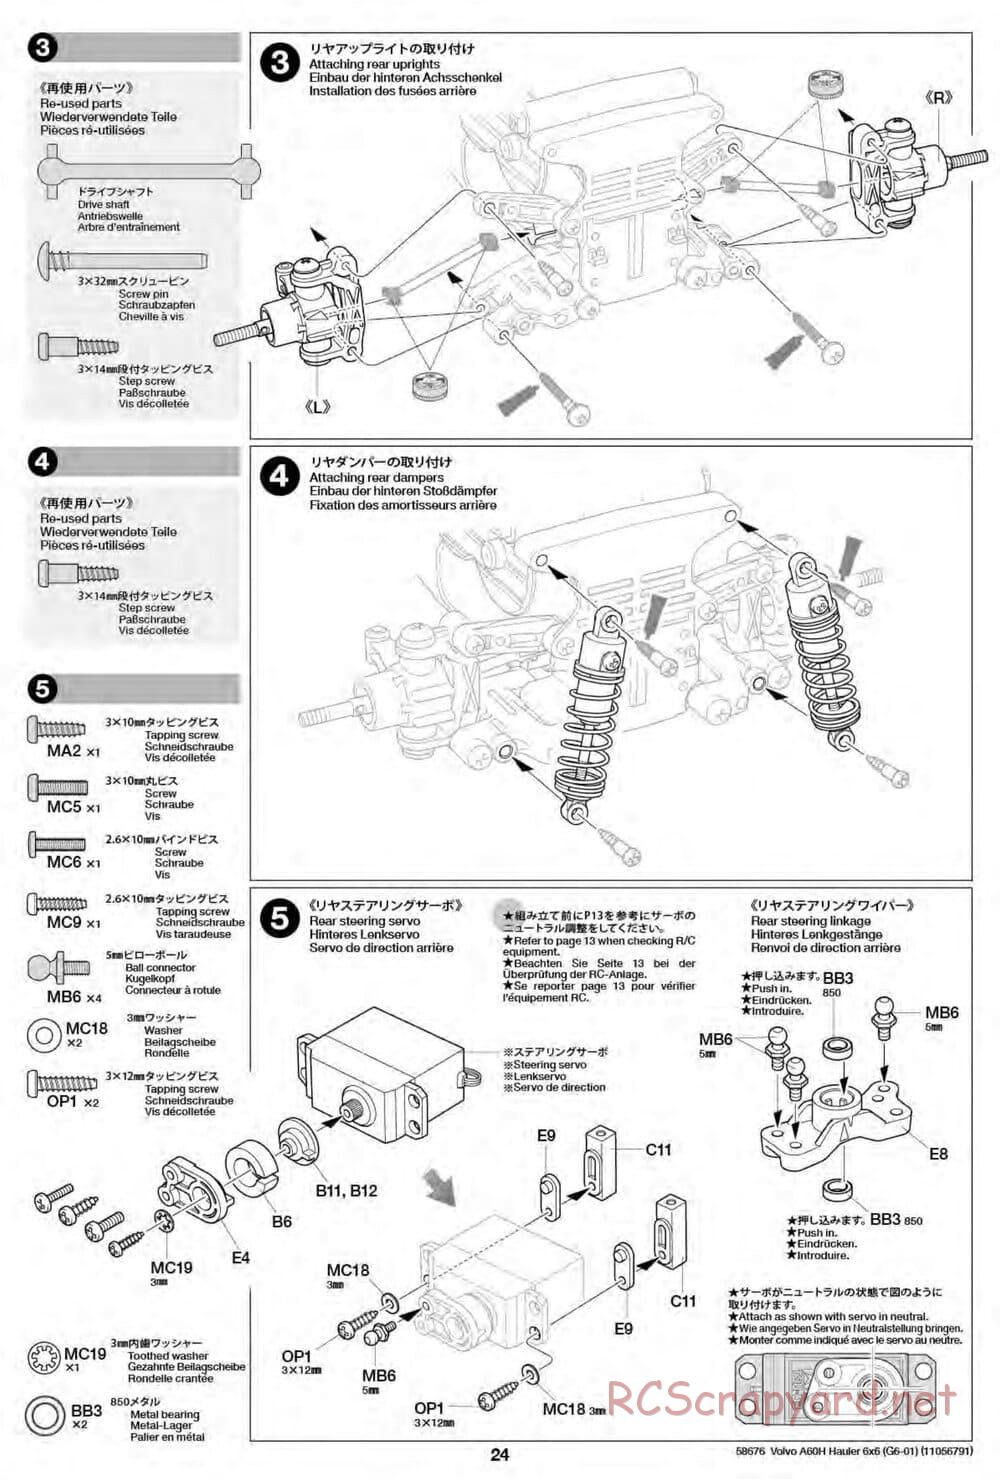 Tamiya - Volvo A60H Dump Truck 6x6 - G6-01 Chassis - Manual - Page 23